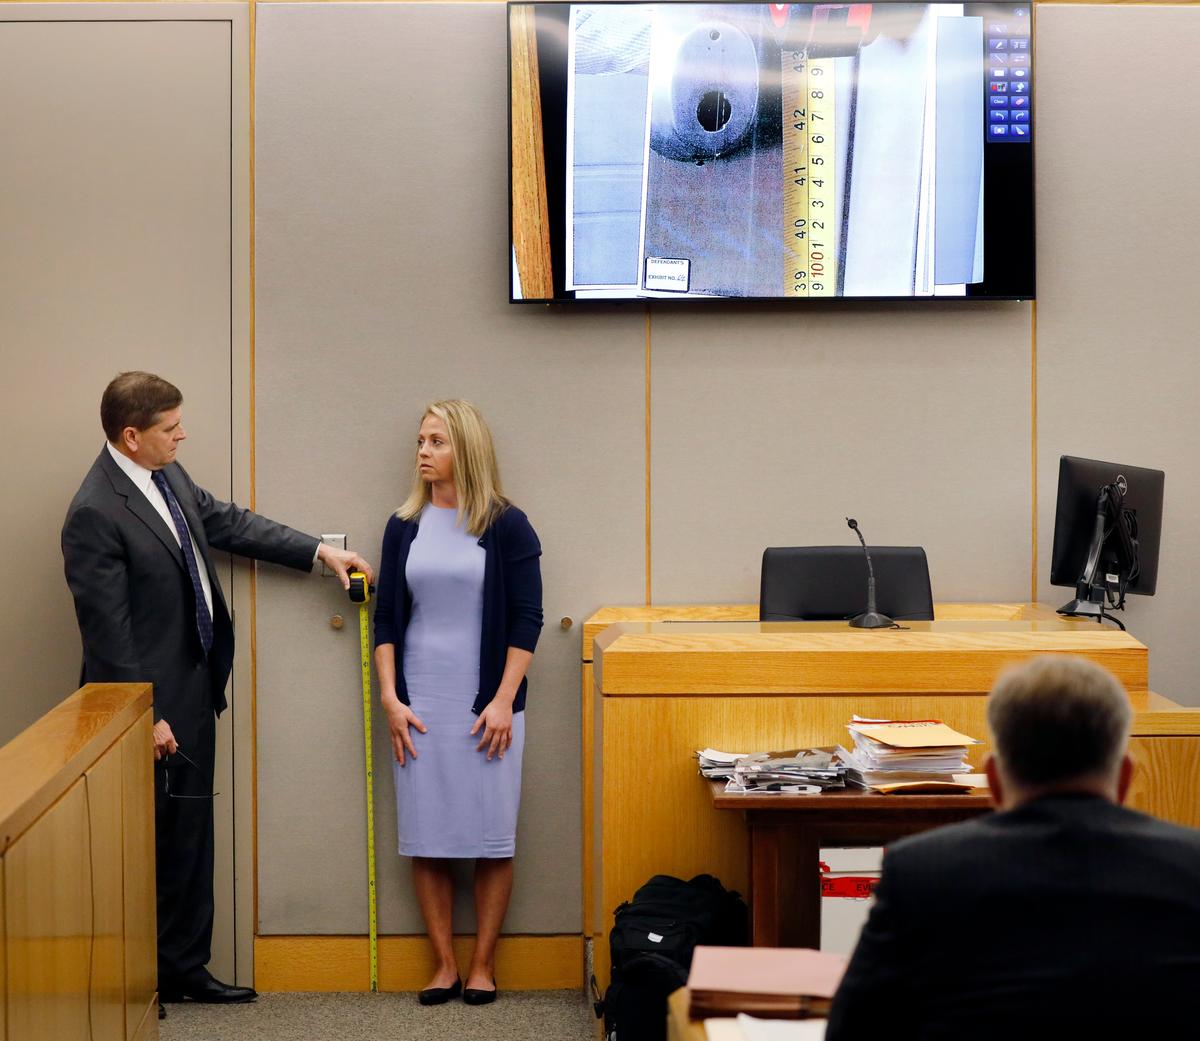 Defense attorney Toby Shook measures the height of a keyhole as fired Dallas police officer Amber Guyger stand against the courtroom wall as she testifies in her murder trial in Dallas on Sept. 27, 2019. (Tom Fox/The Dallas Morning News via AP, Pool)